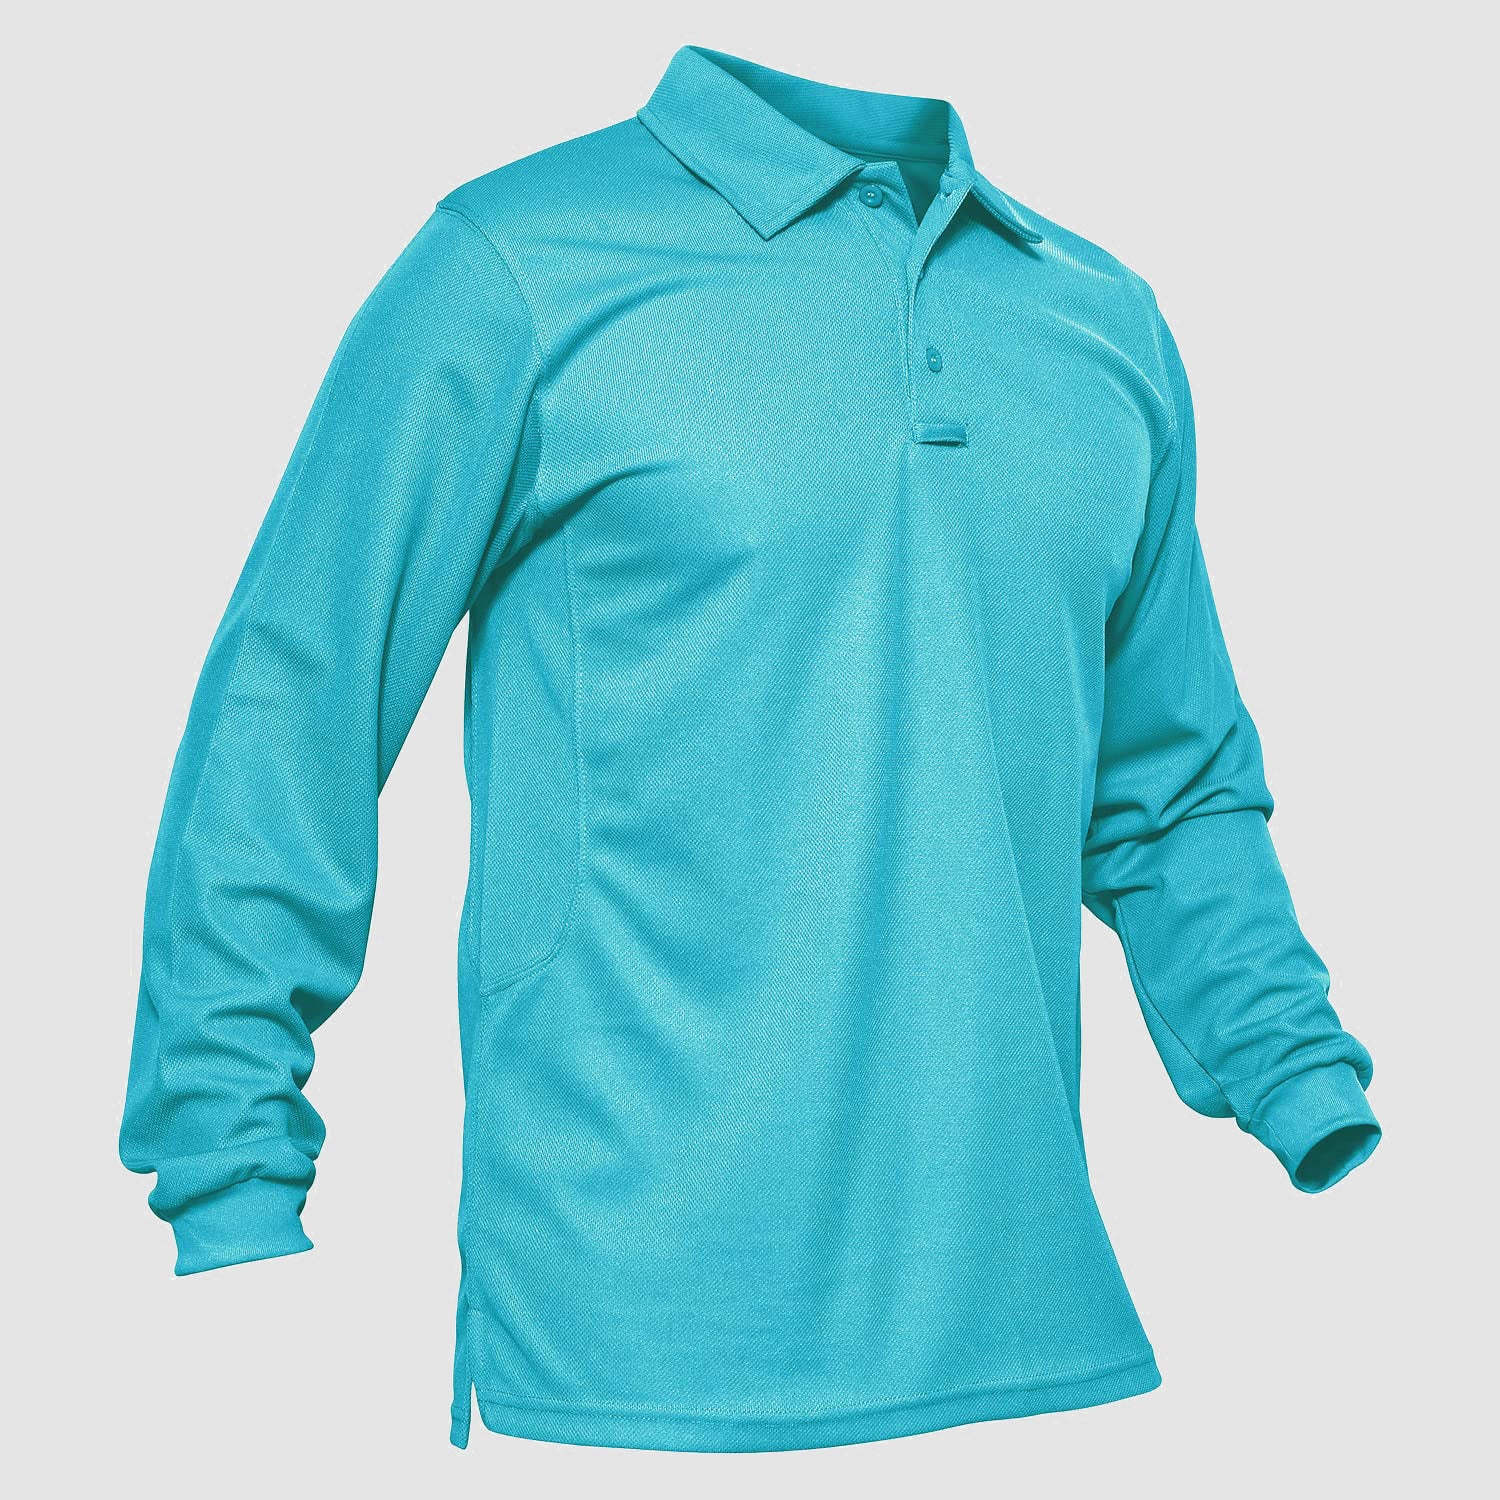 Men's Long-Sleeve Polo Shirt Quick Dry Breathable T-shirt